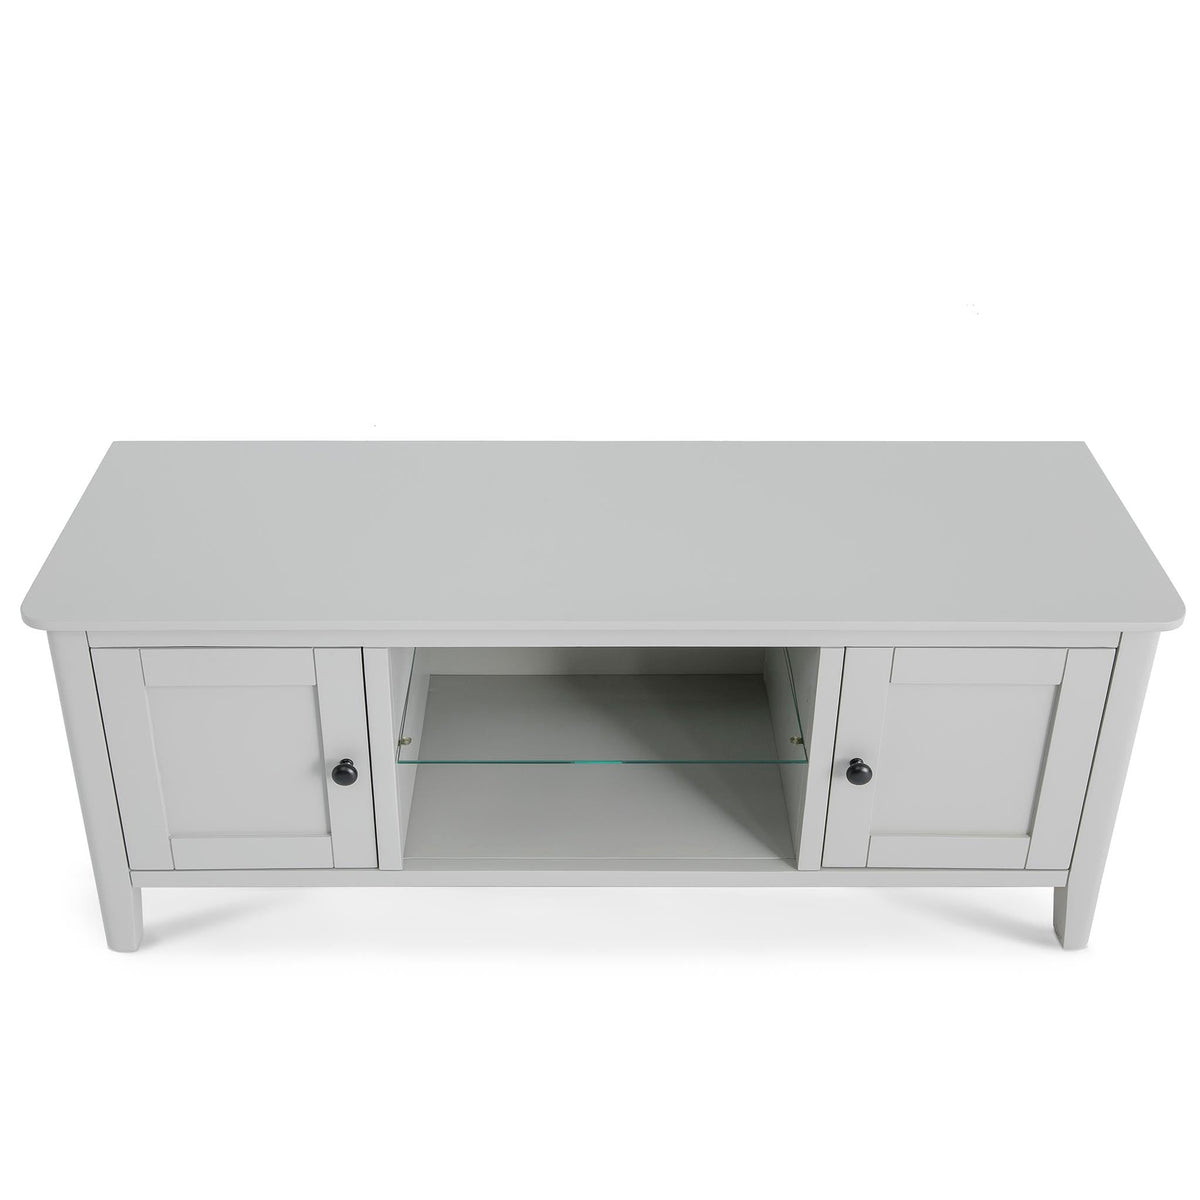 Elgin Grey 120cm large TV stand - Looking down on TV Stand